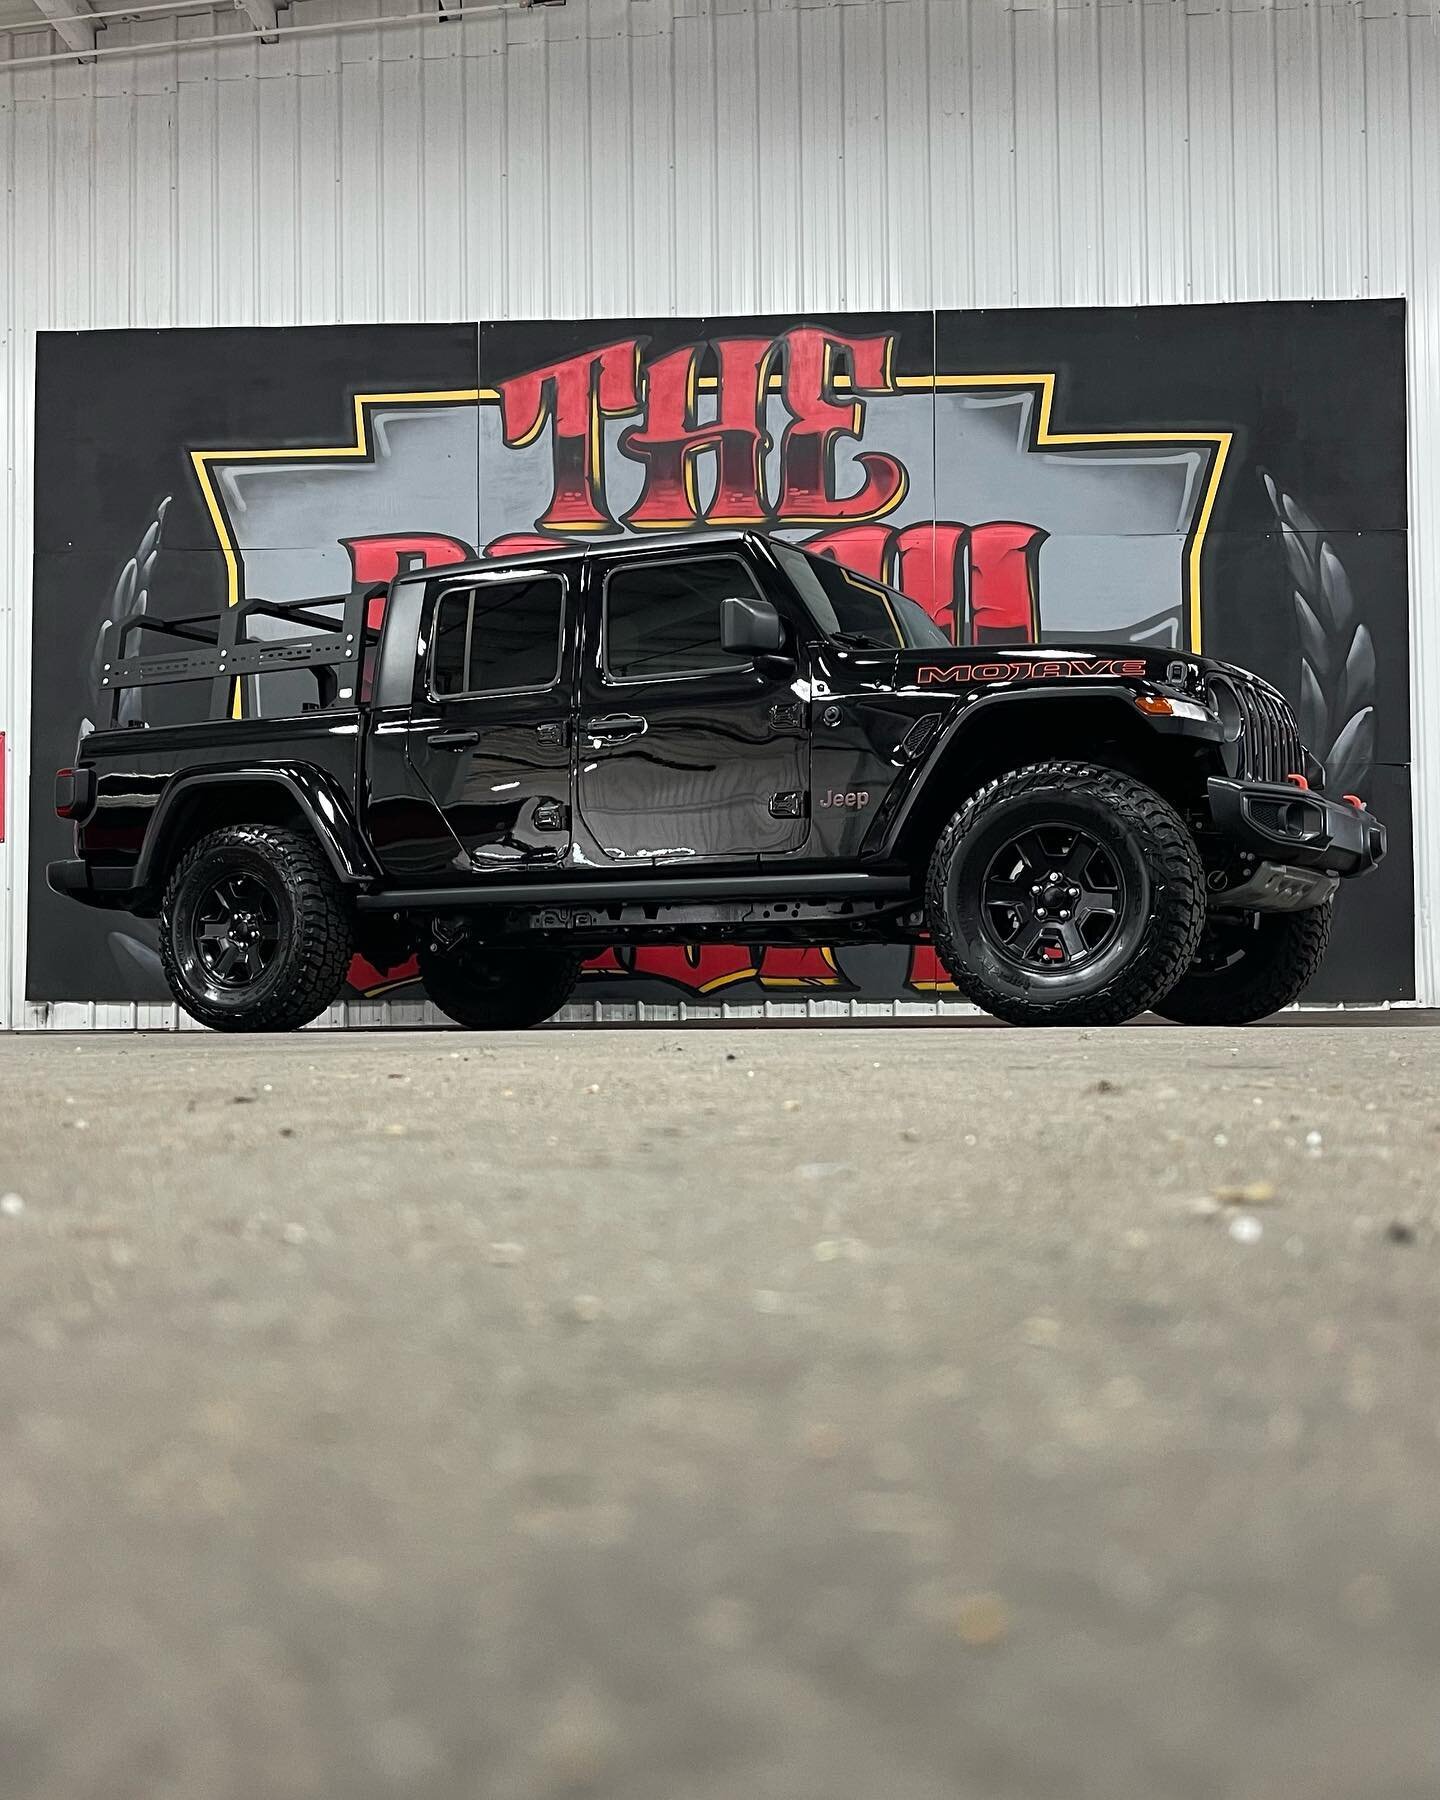 Russel Crowe came in for the works check it out ! #westmichigan #springlake #grandhaven #detail #details #detailers #detailersofinstagram #gtechniq_na #gtechniqaccredited #gtechniq #gtechniqna #ceramic #ceramics #jeep #jeepgladiator #jeepmoab #jeepgl